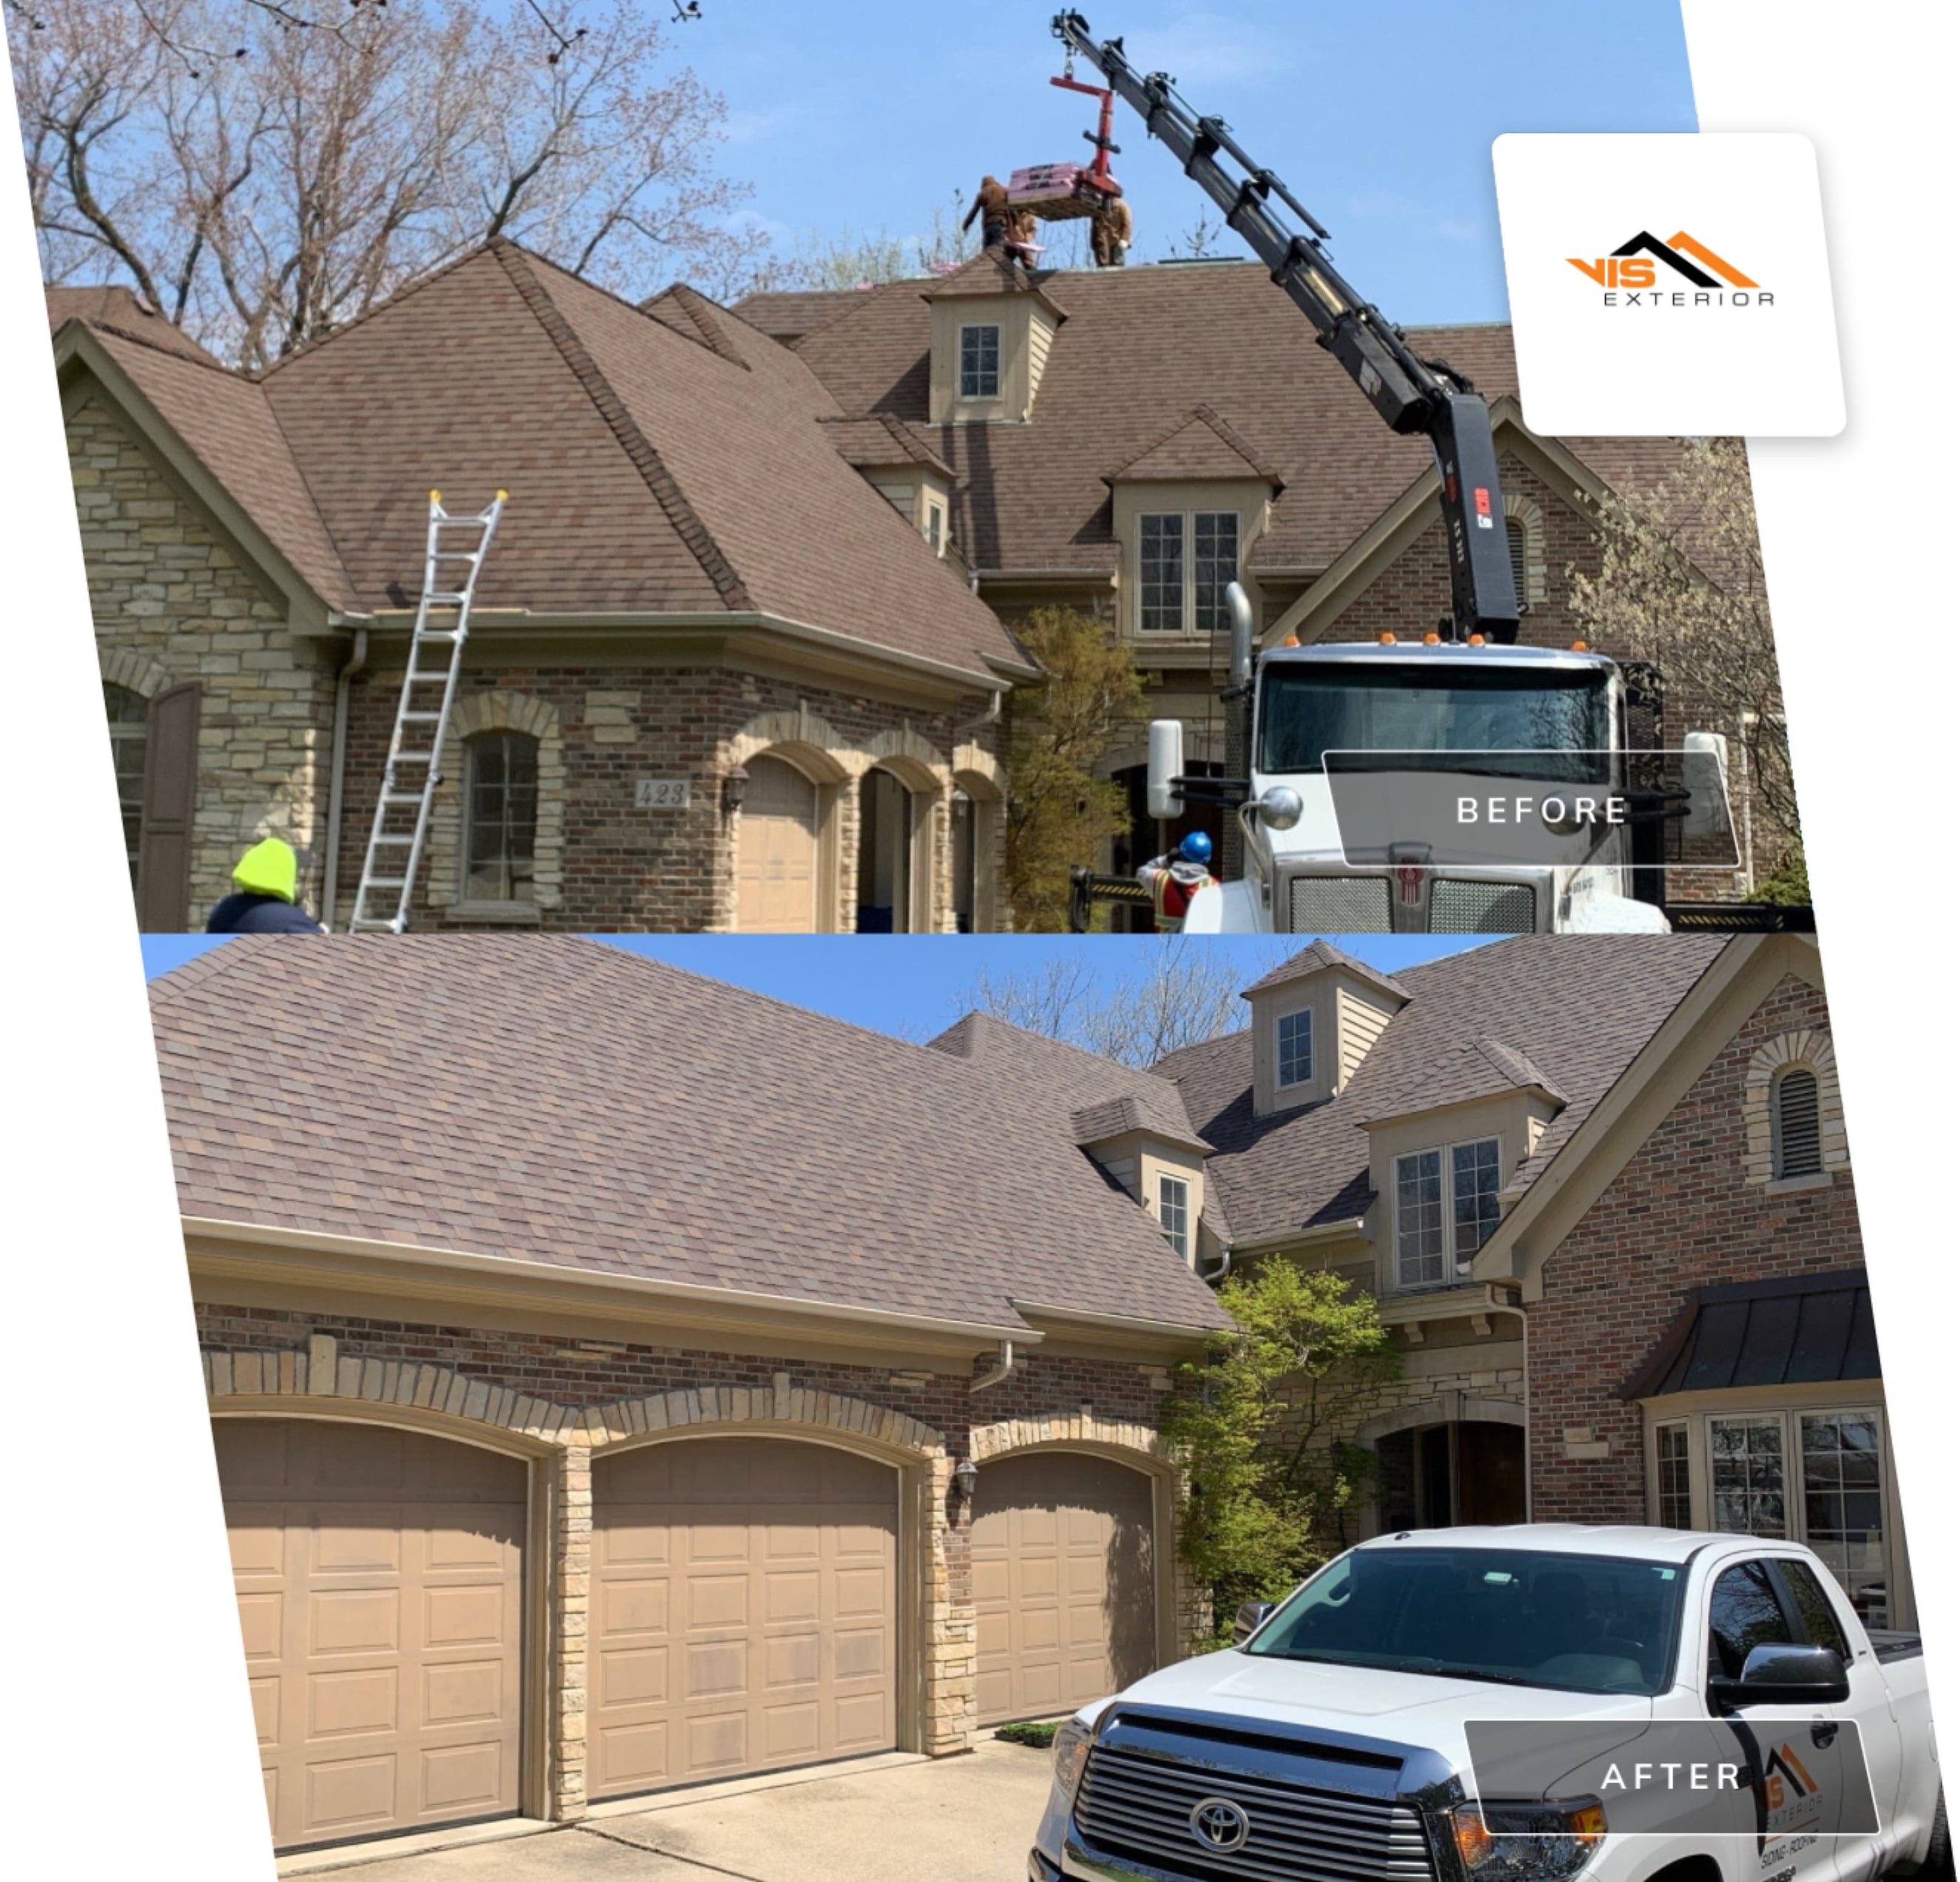 Owens Corning Duration Shingles Roof Installation in Hinsdale before after project photo